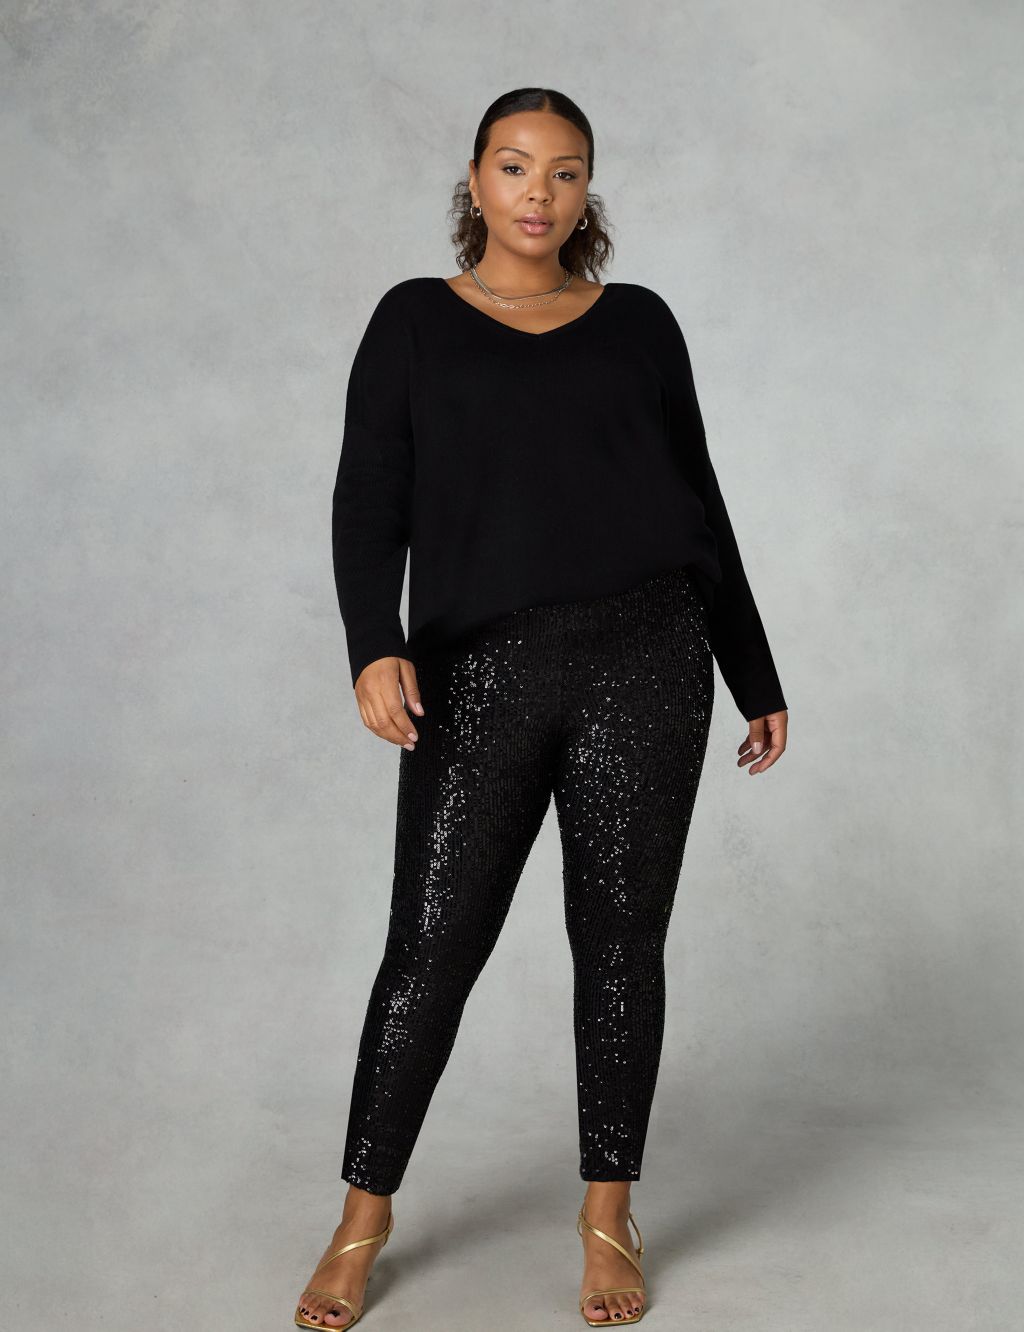 M&S' 'softest' £19 leggings in seven colours hailed as a 'godsend